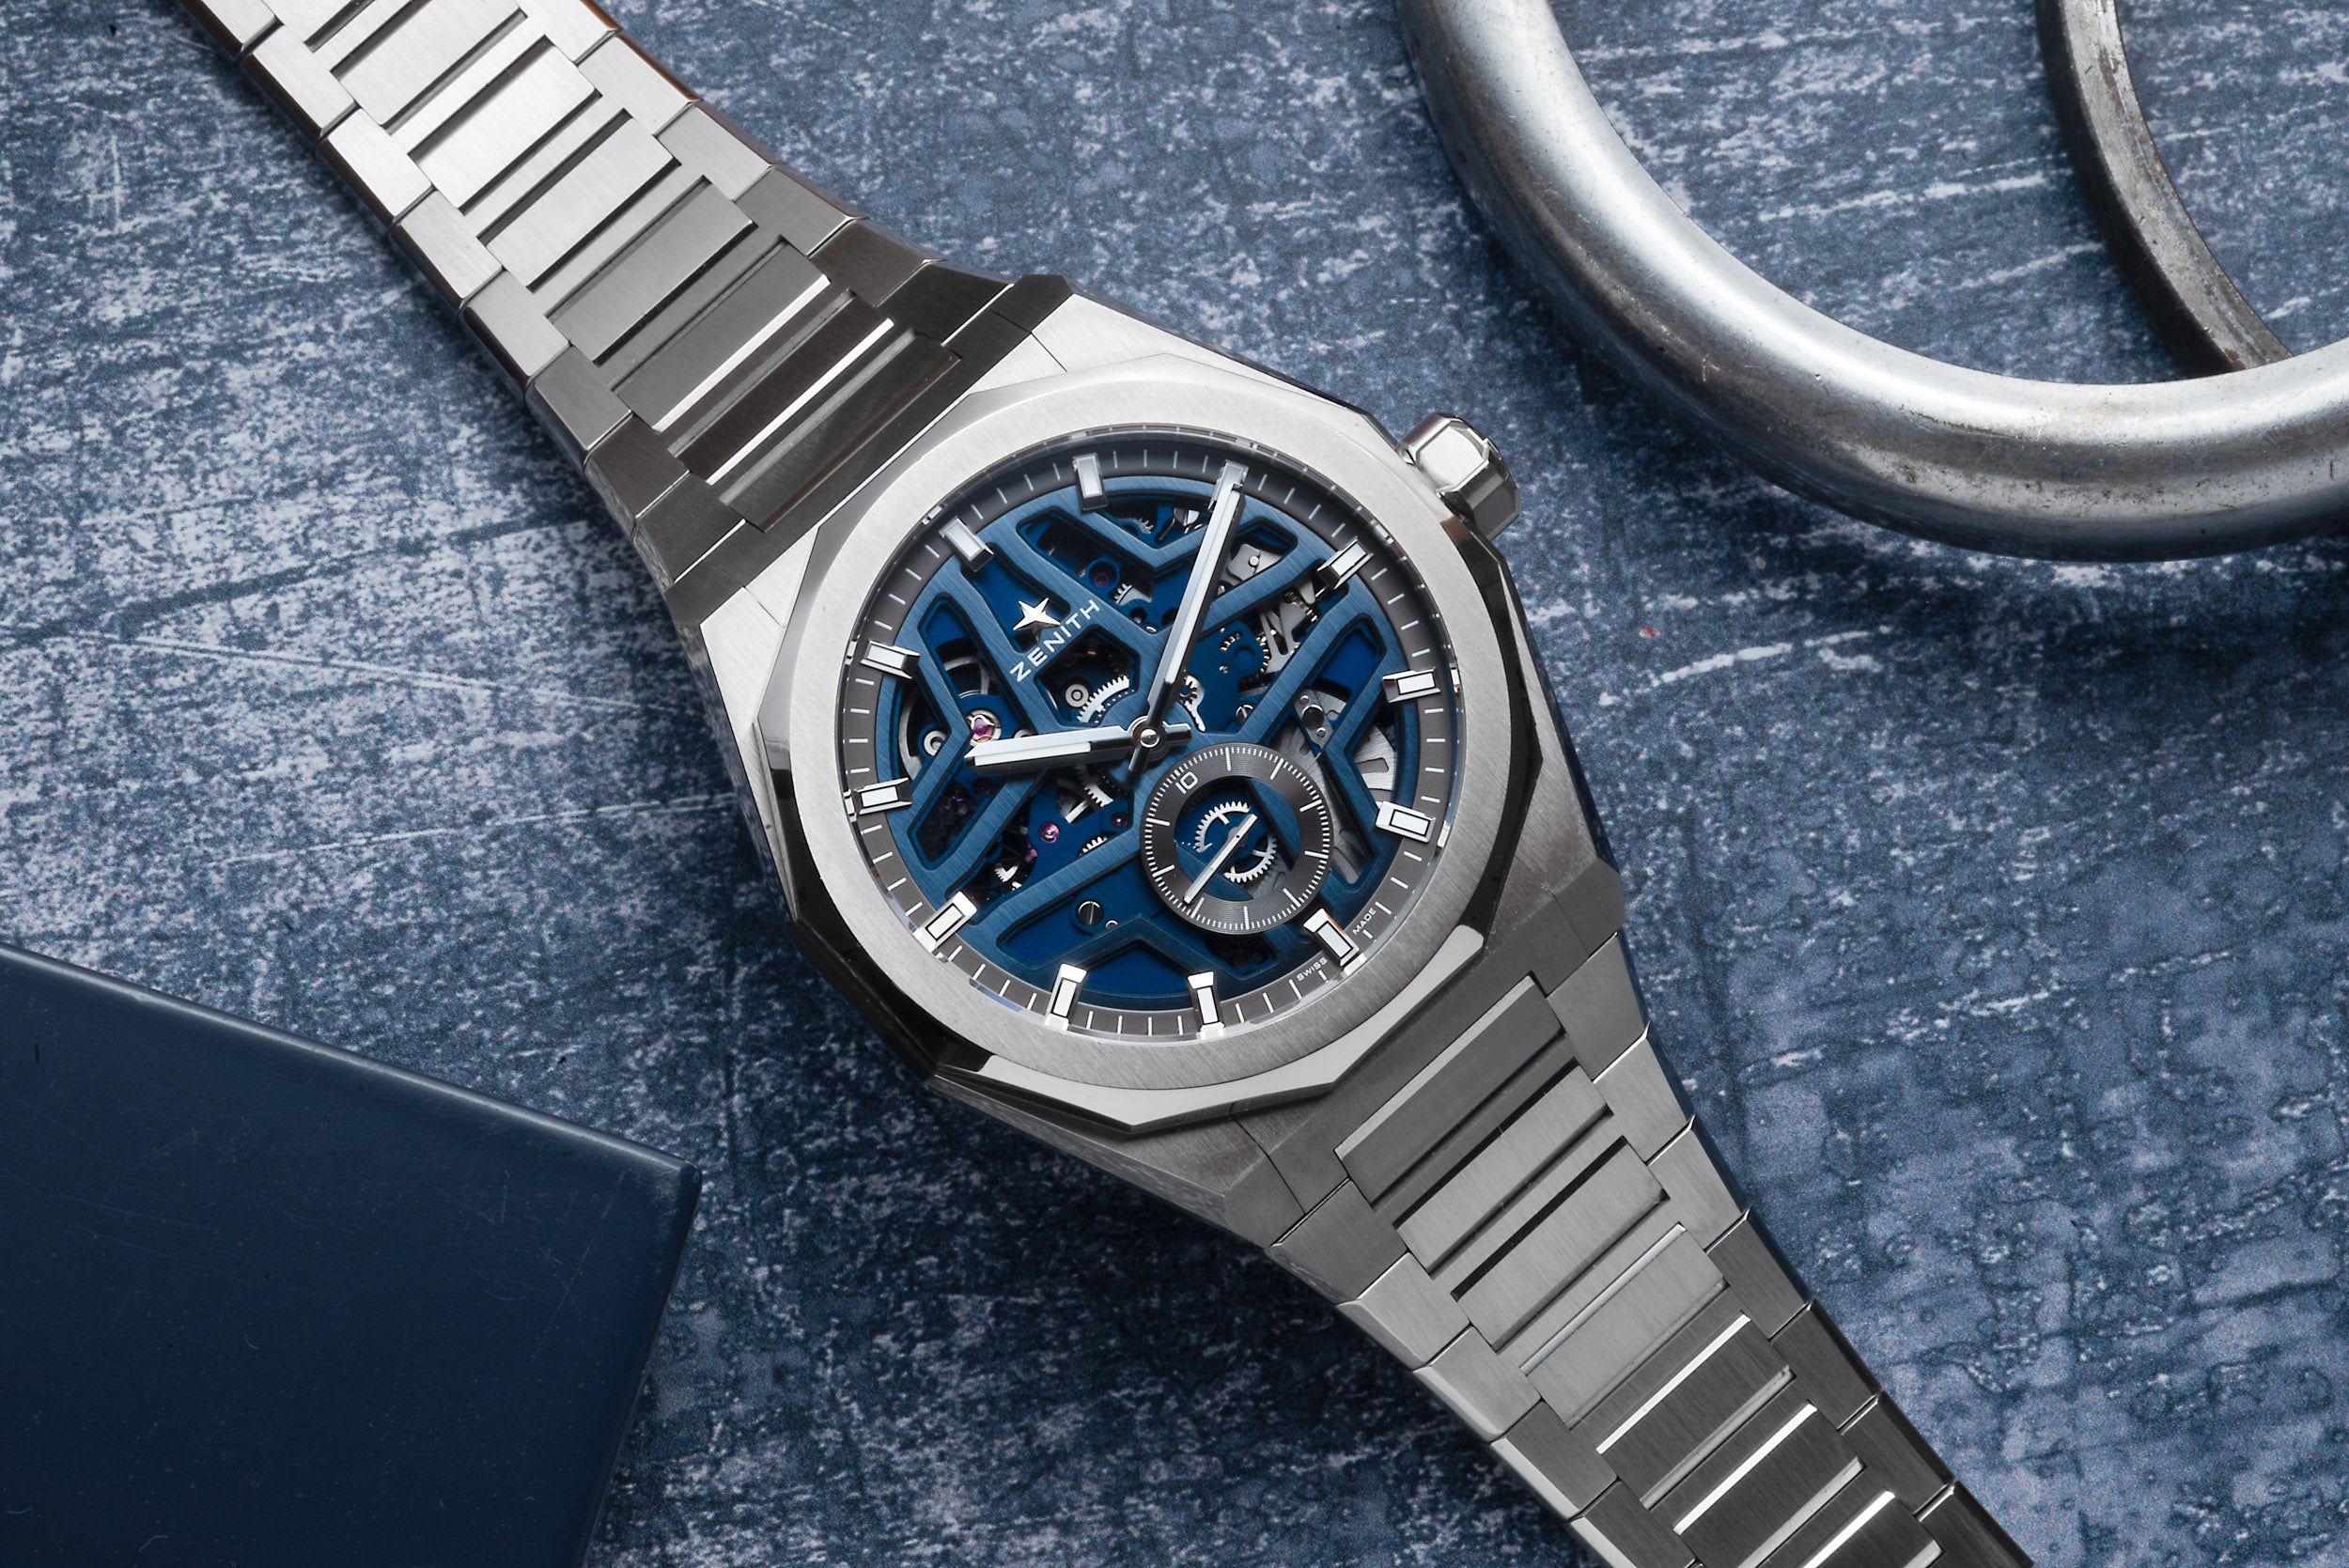 A classic with a contemporary spin: the Zenith DEFY Skyline